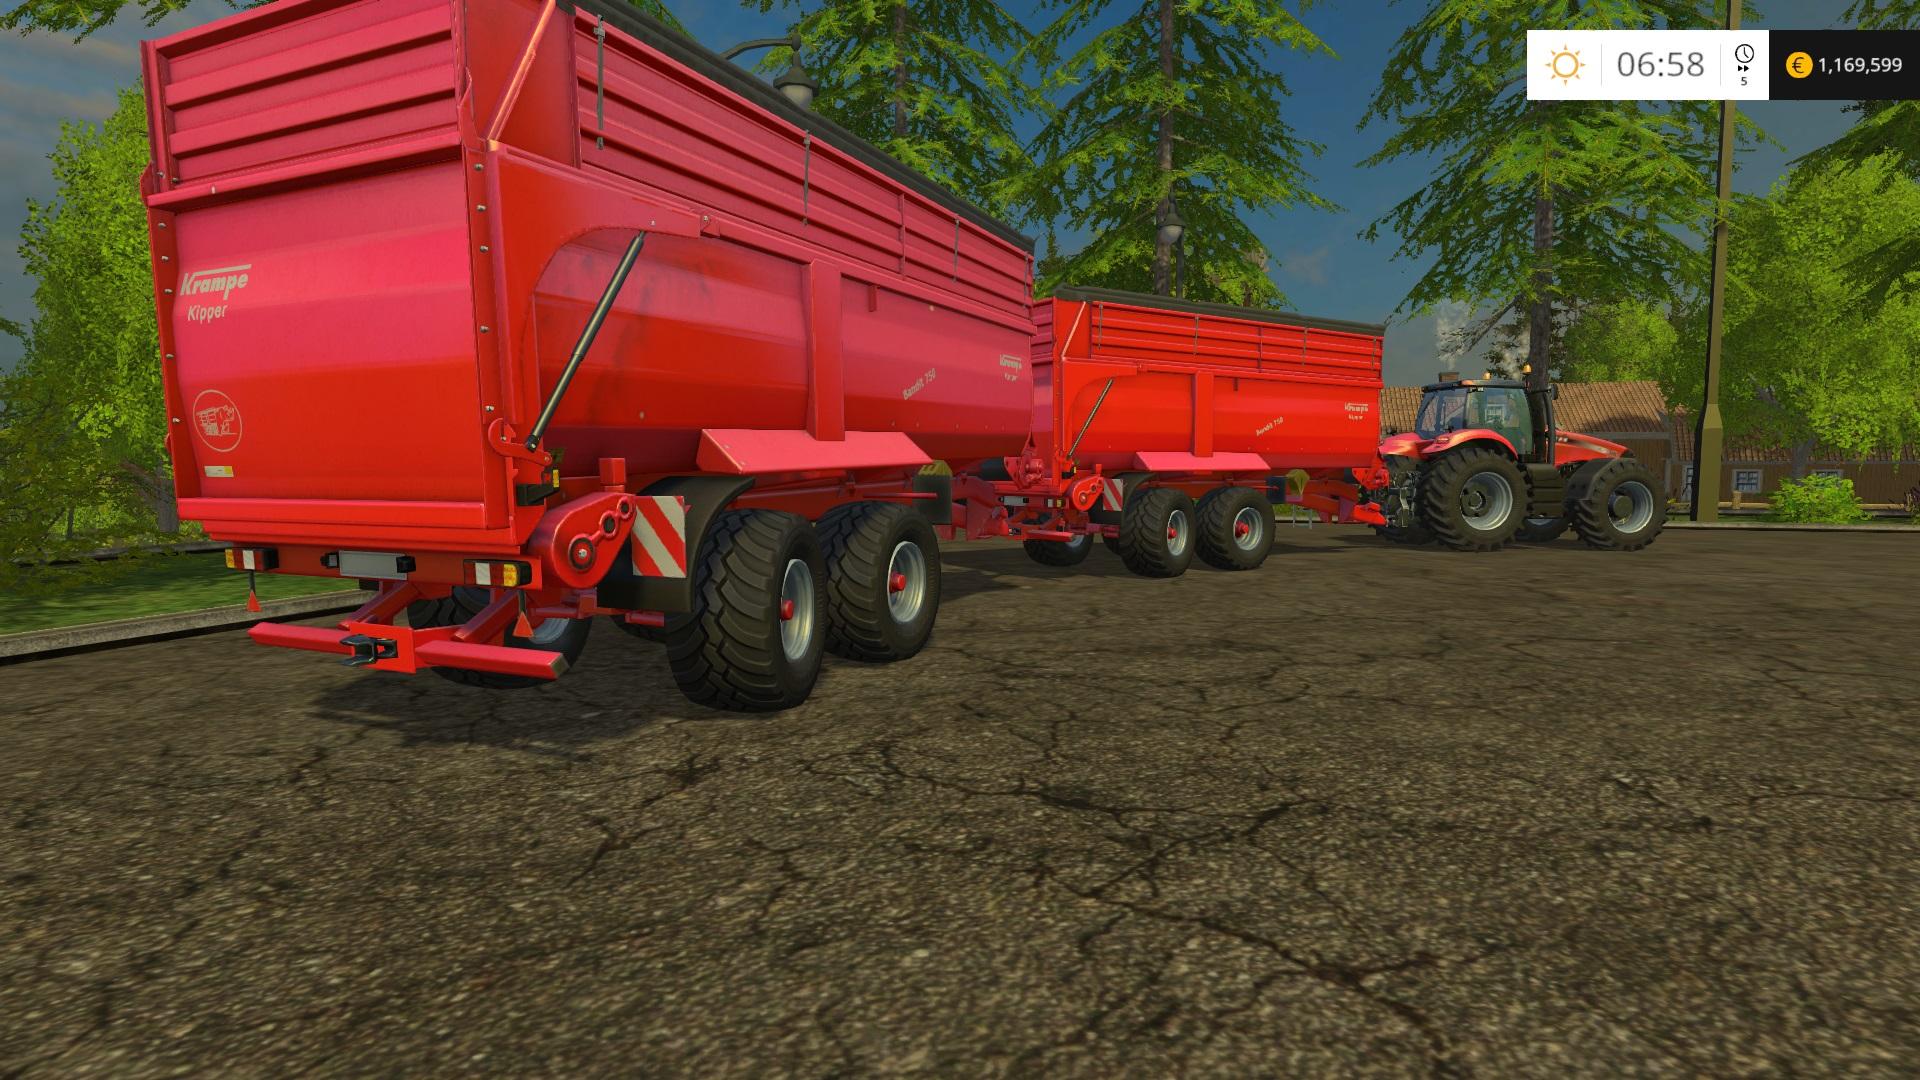 Krampe 750 Multi Hdr And Dyeable Included V10 • Farming Simulator 19 17 22 Mods Fs19 17 5344